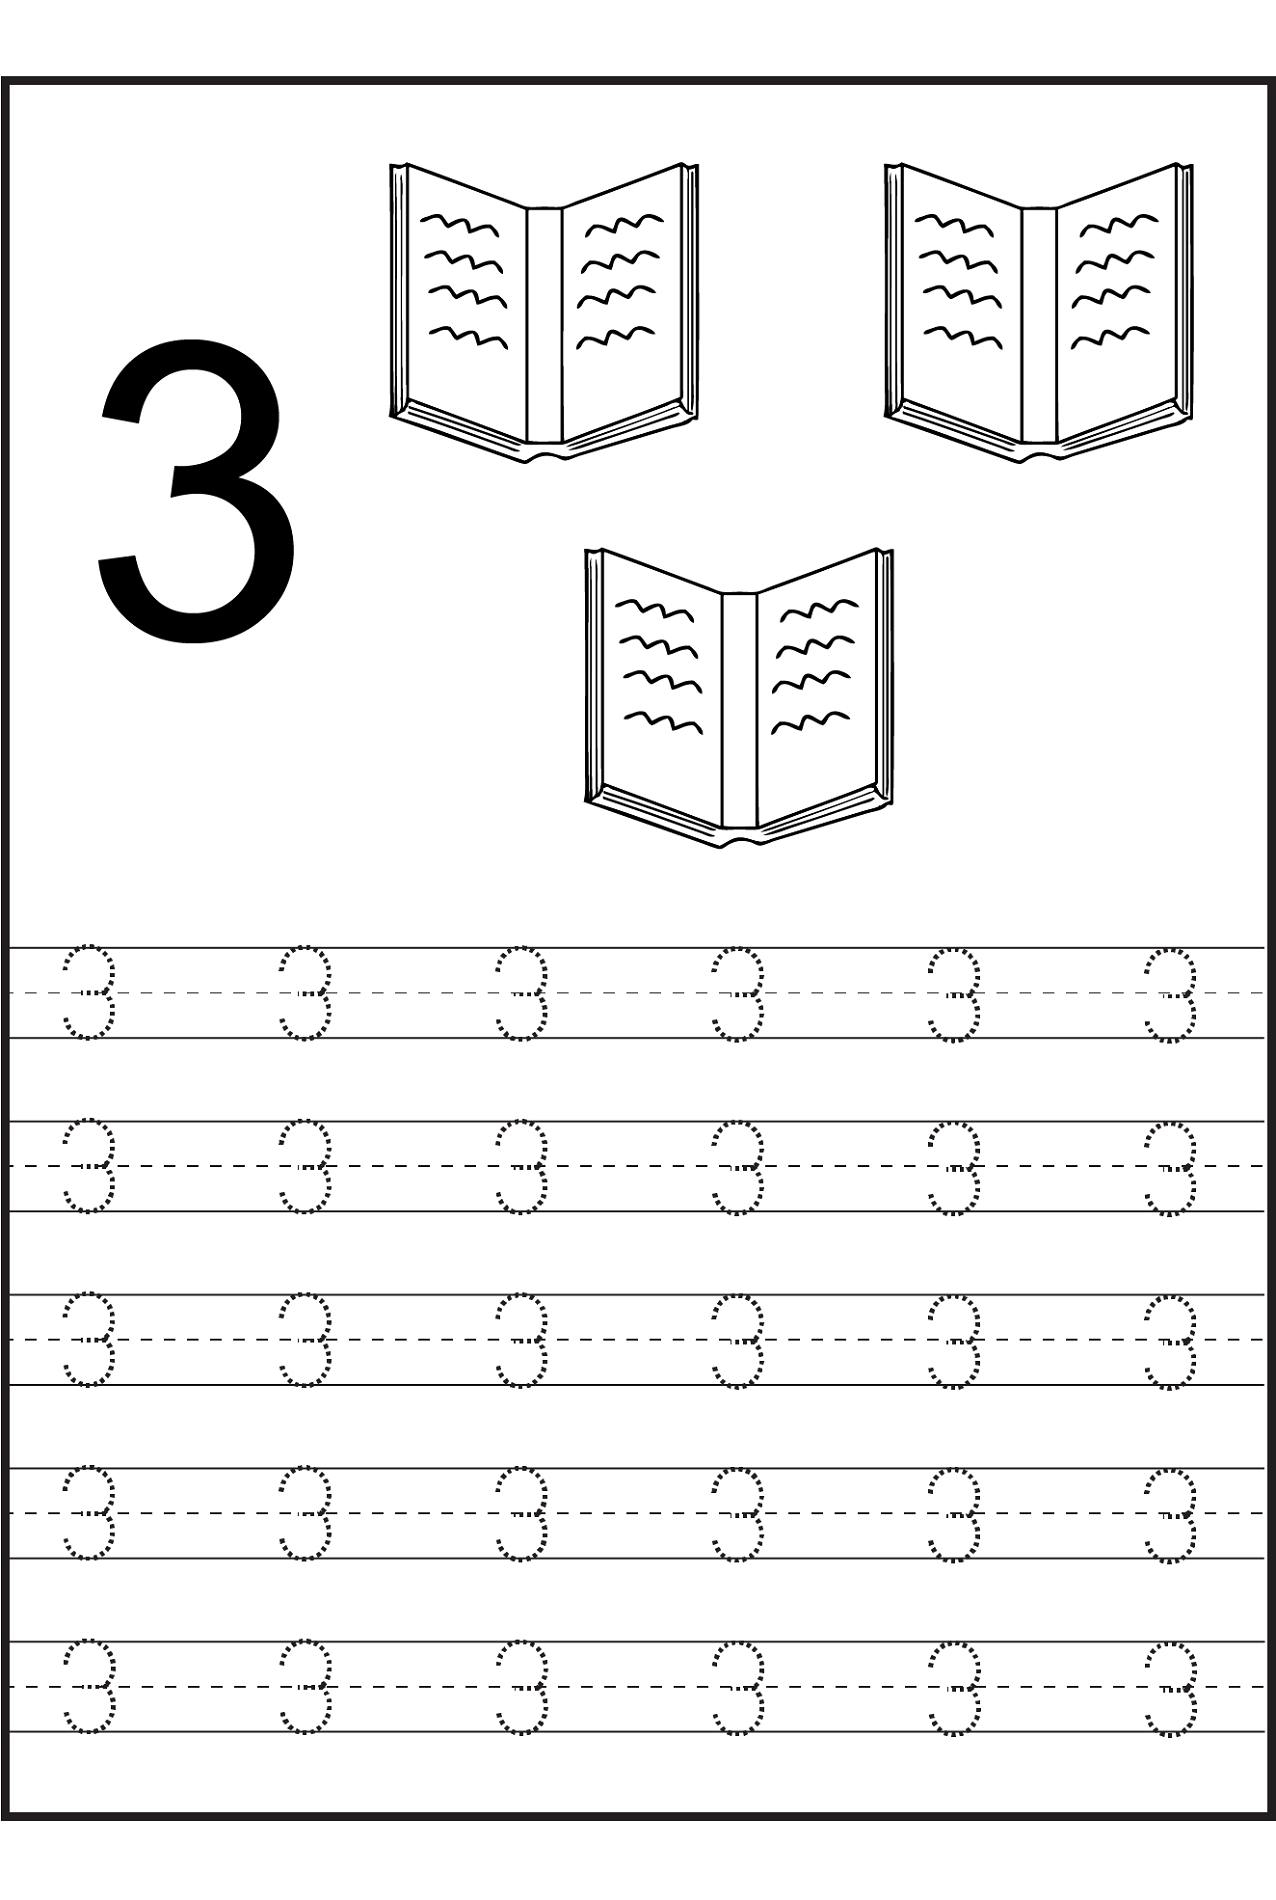 Fre Printable Worksheets For Three Year Old